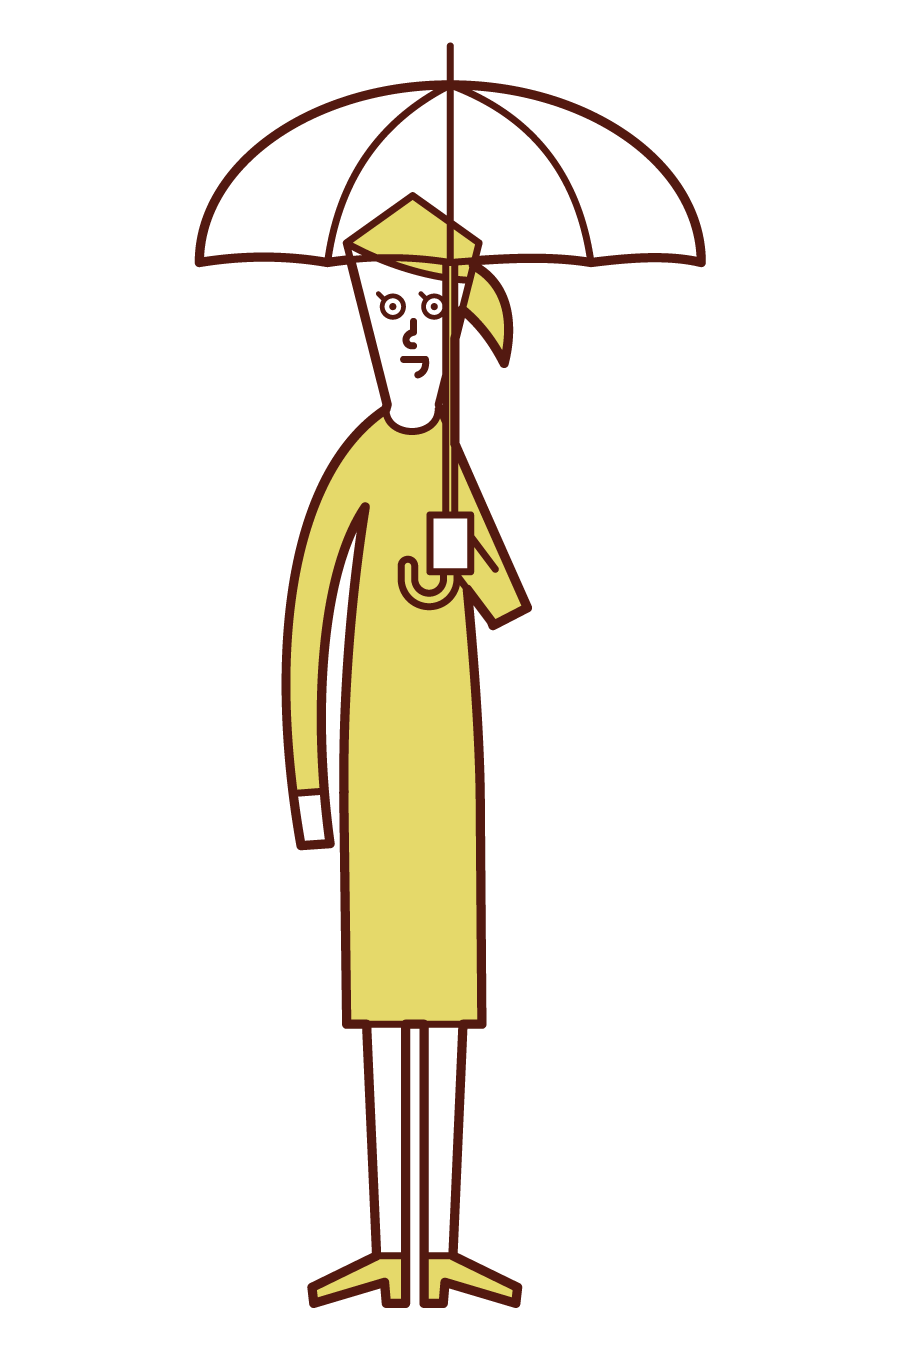 Illustration of a woman holding an umbrella